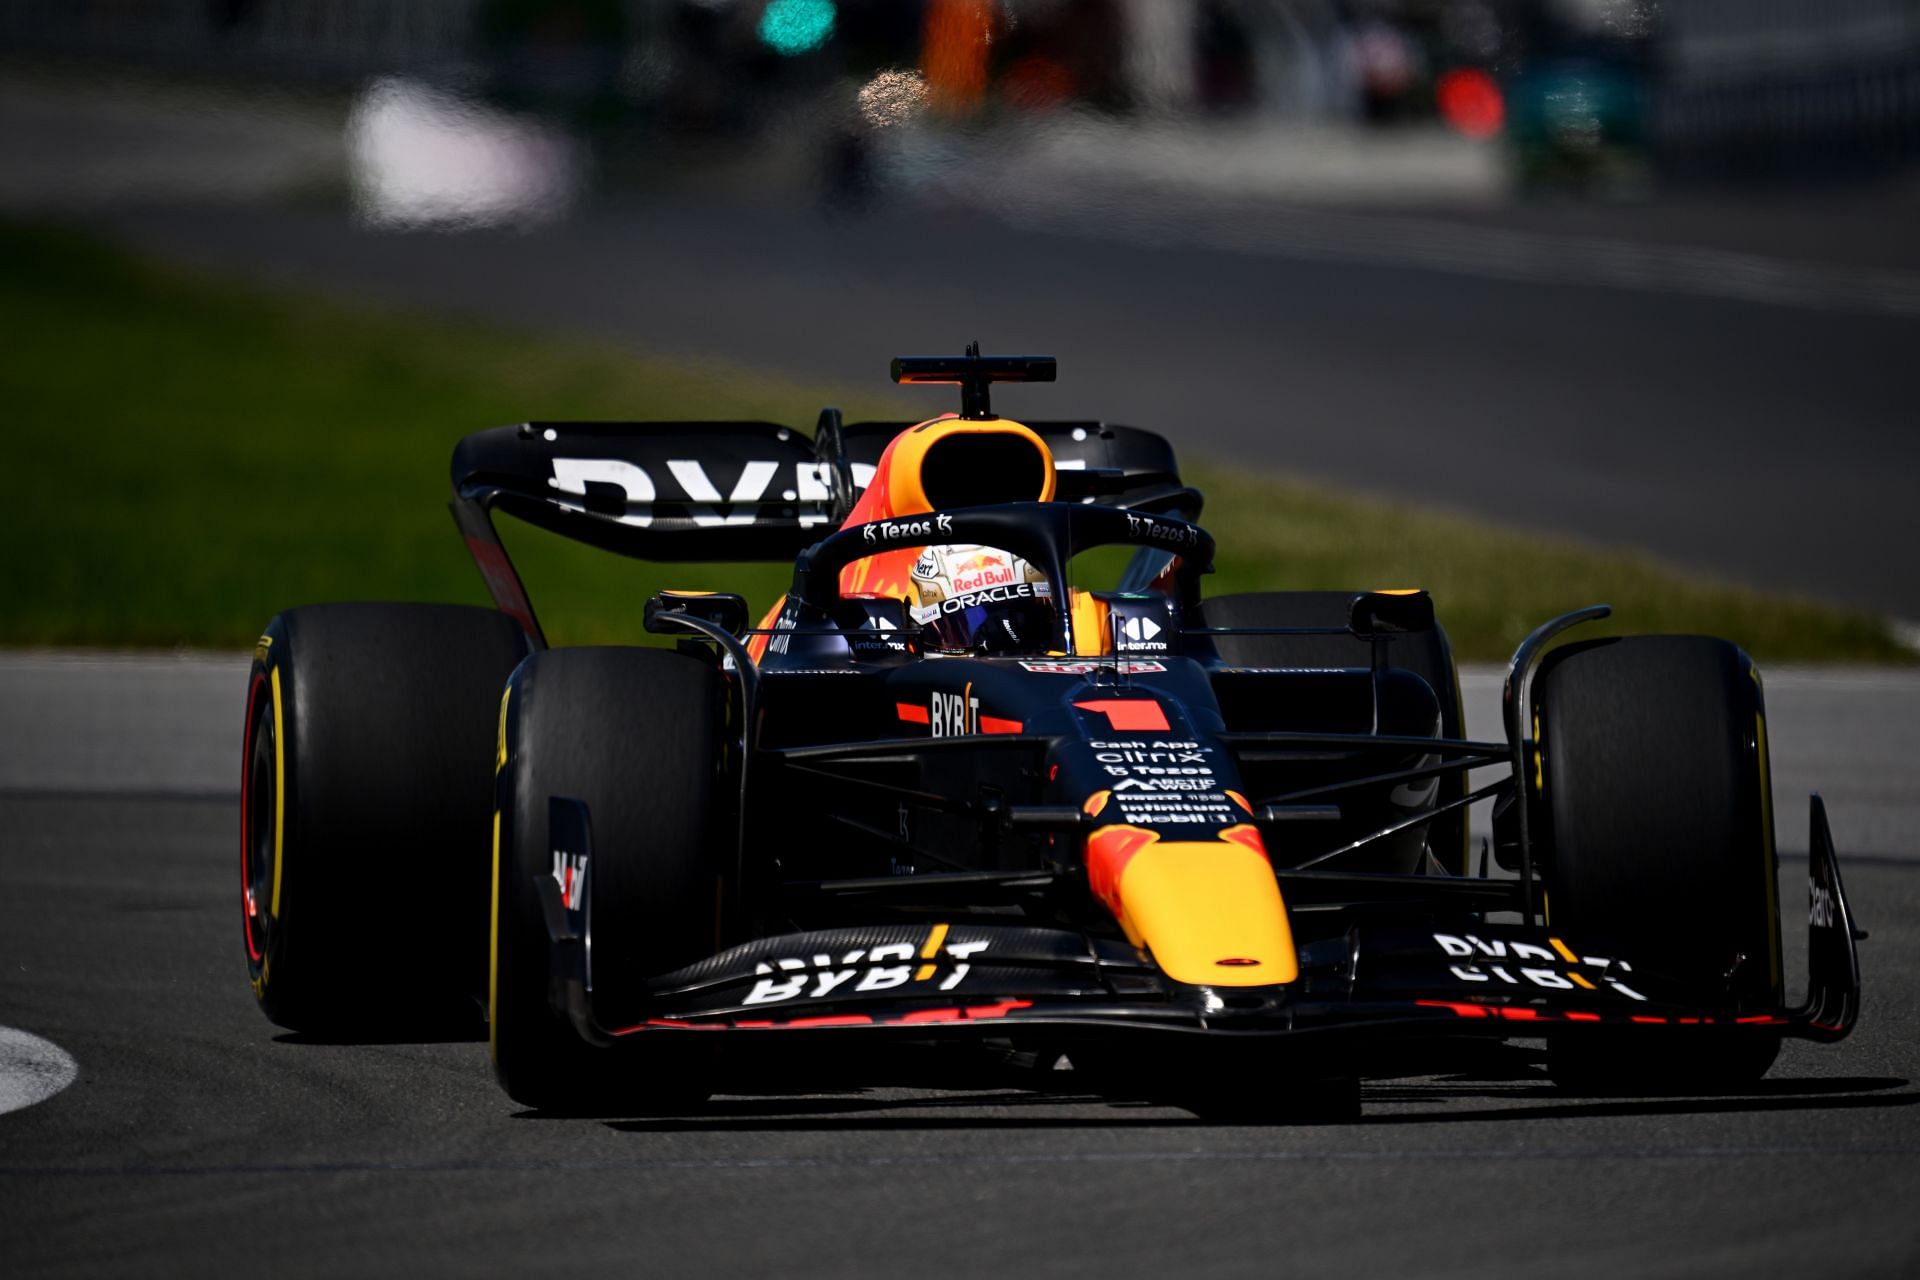 Red Bull driver Max Verstappen in action during the 2022 F1 Canadian GP. (Photo by Clive Mason/Getty Images)